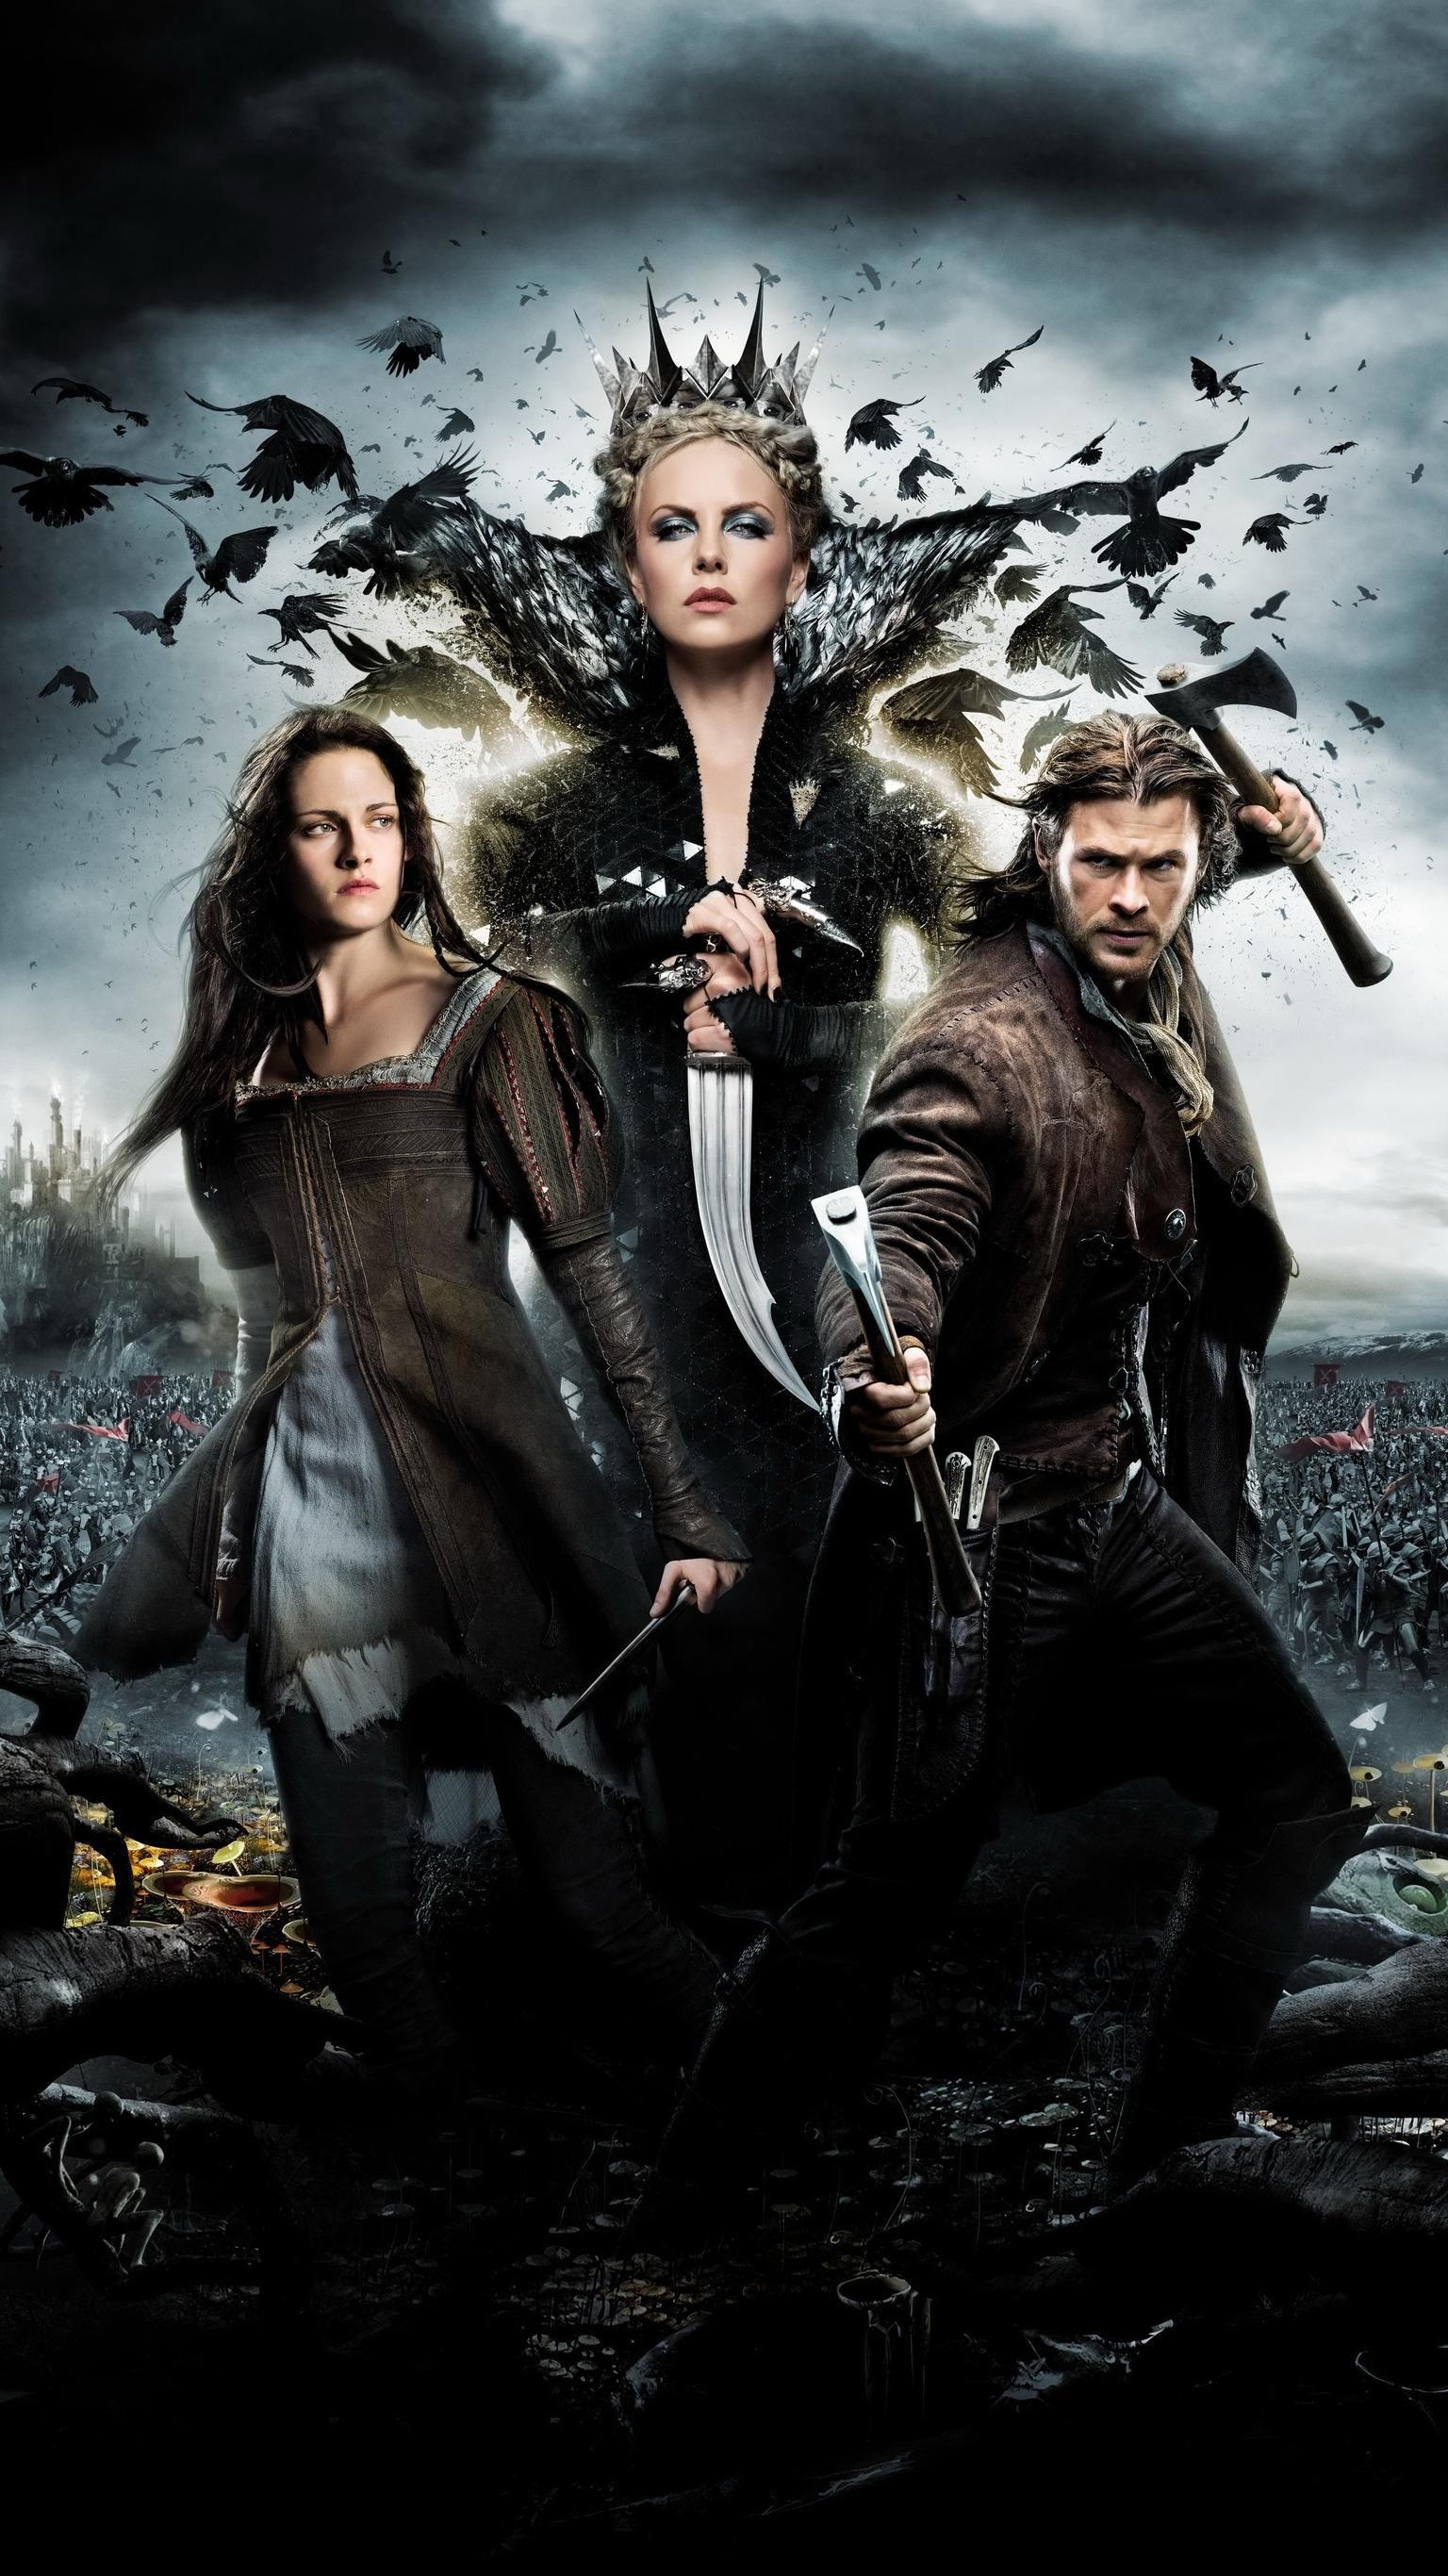 Snow White and the Huntsman, Phone wallpaper, Movie mania, Coolest films, 1540x2740 HD Handy